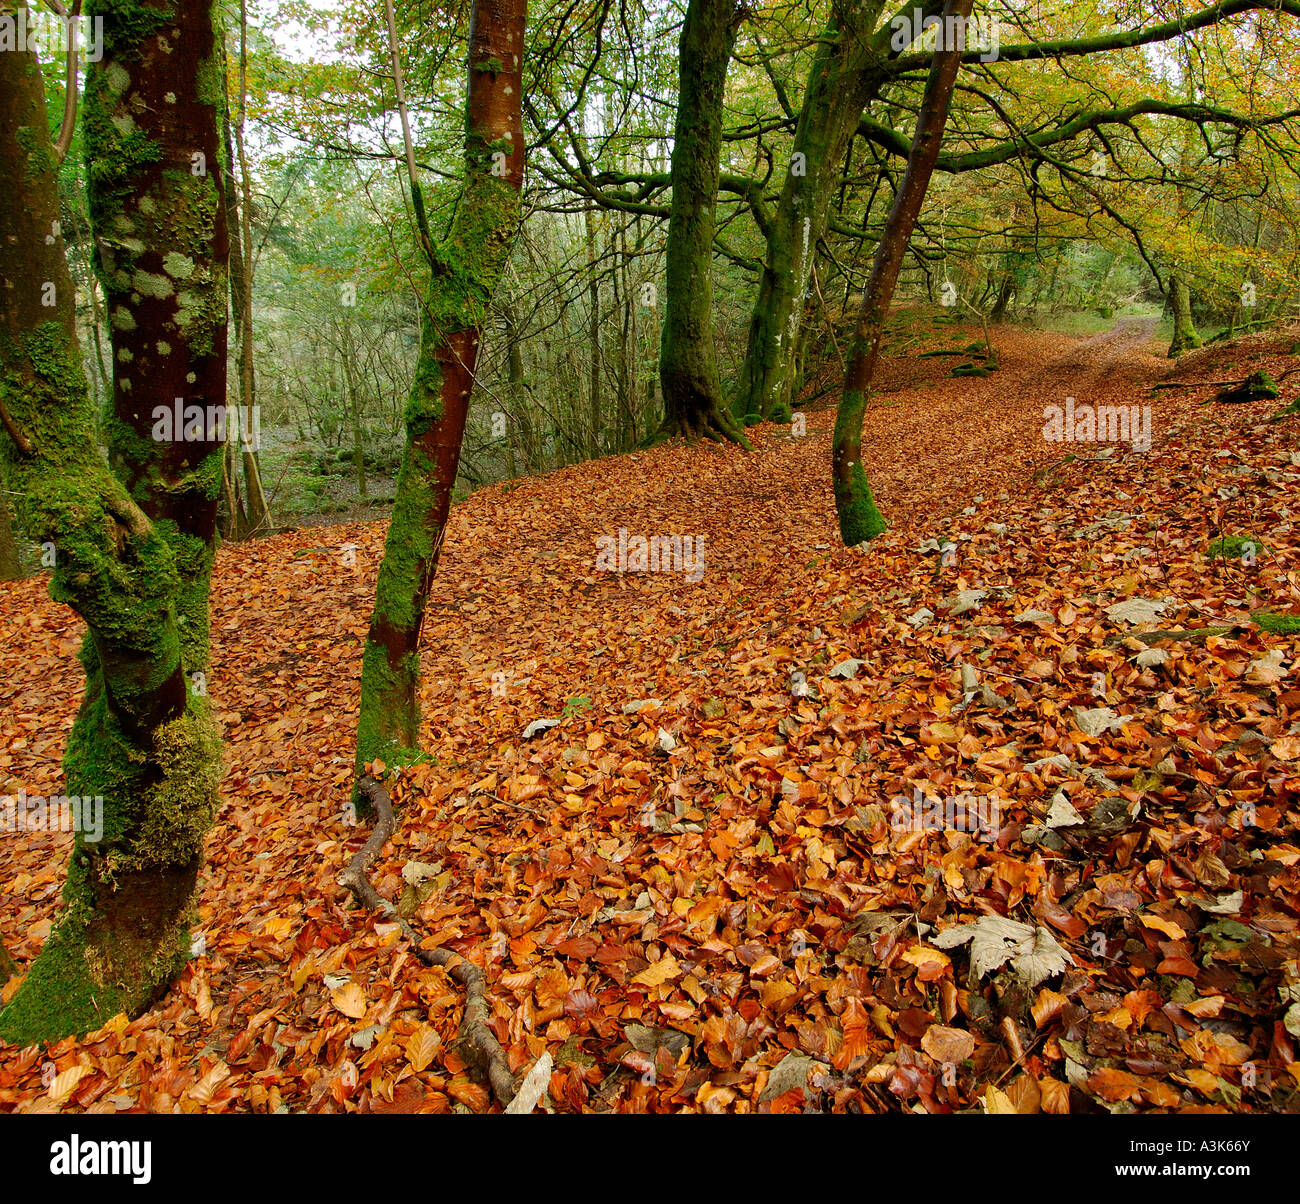 Track through autumnal woodland scene with golden brown fallen leaves and partially bare trees covered in vivid green lichen Stock Photo